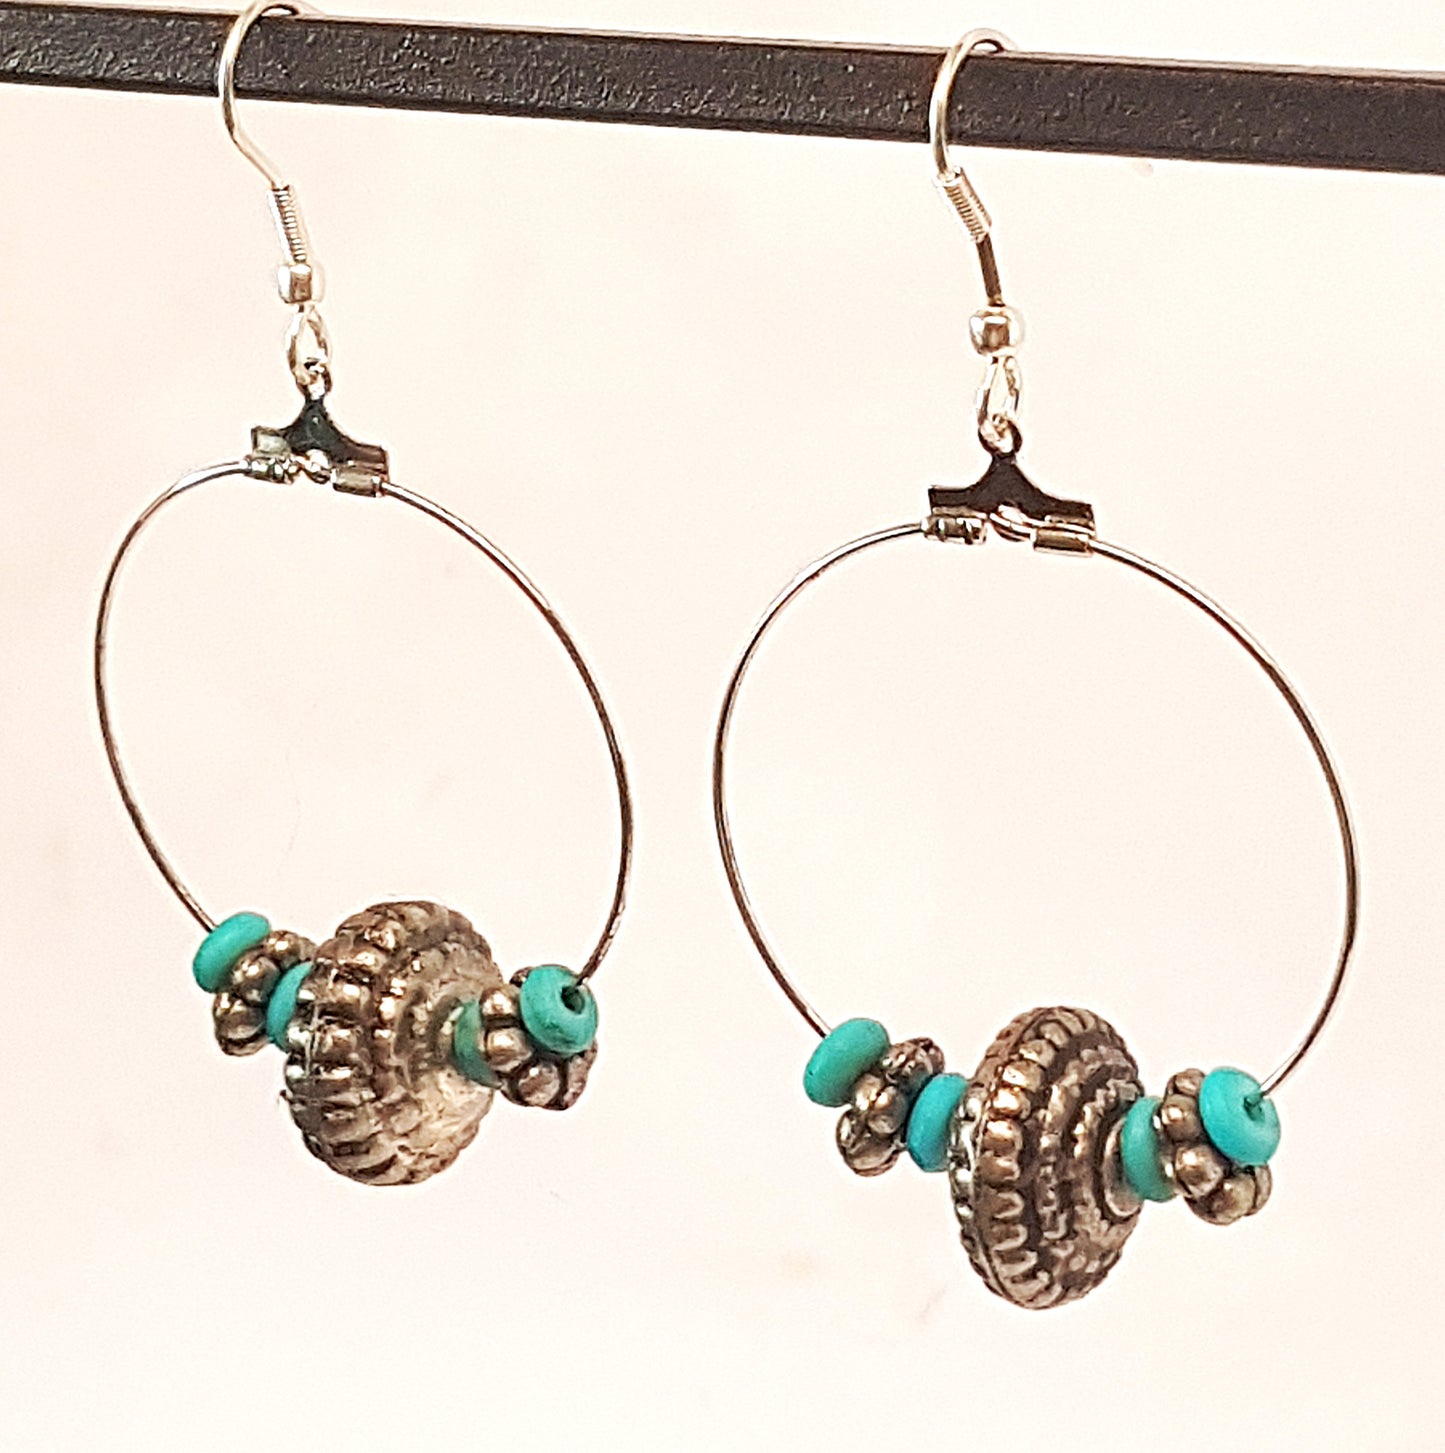 Silver hoop earrings with engraved vintage pewter beads & turquoise stones.